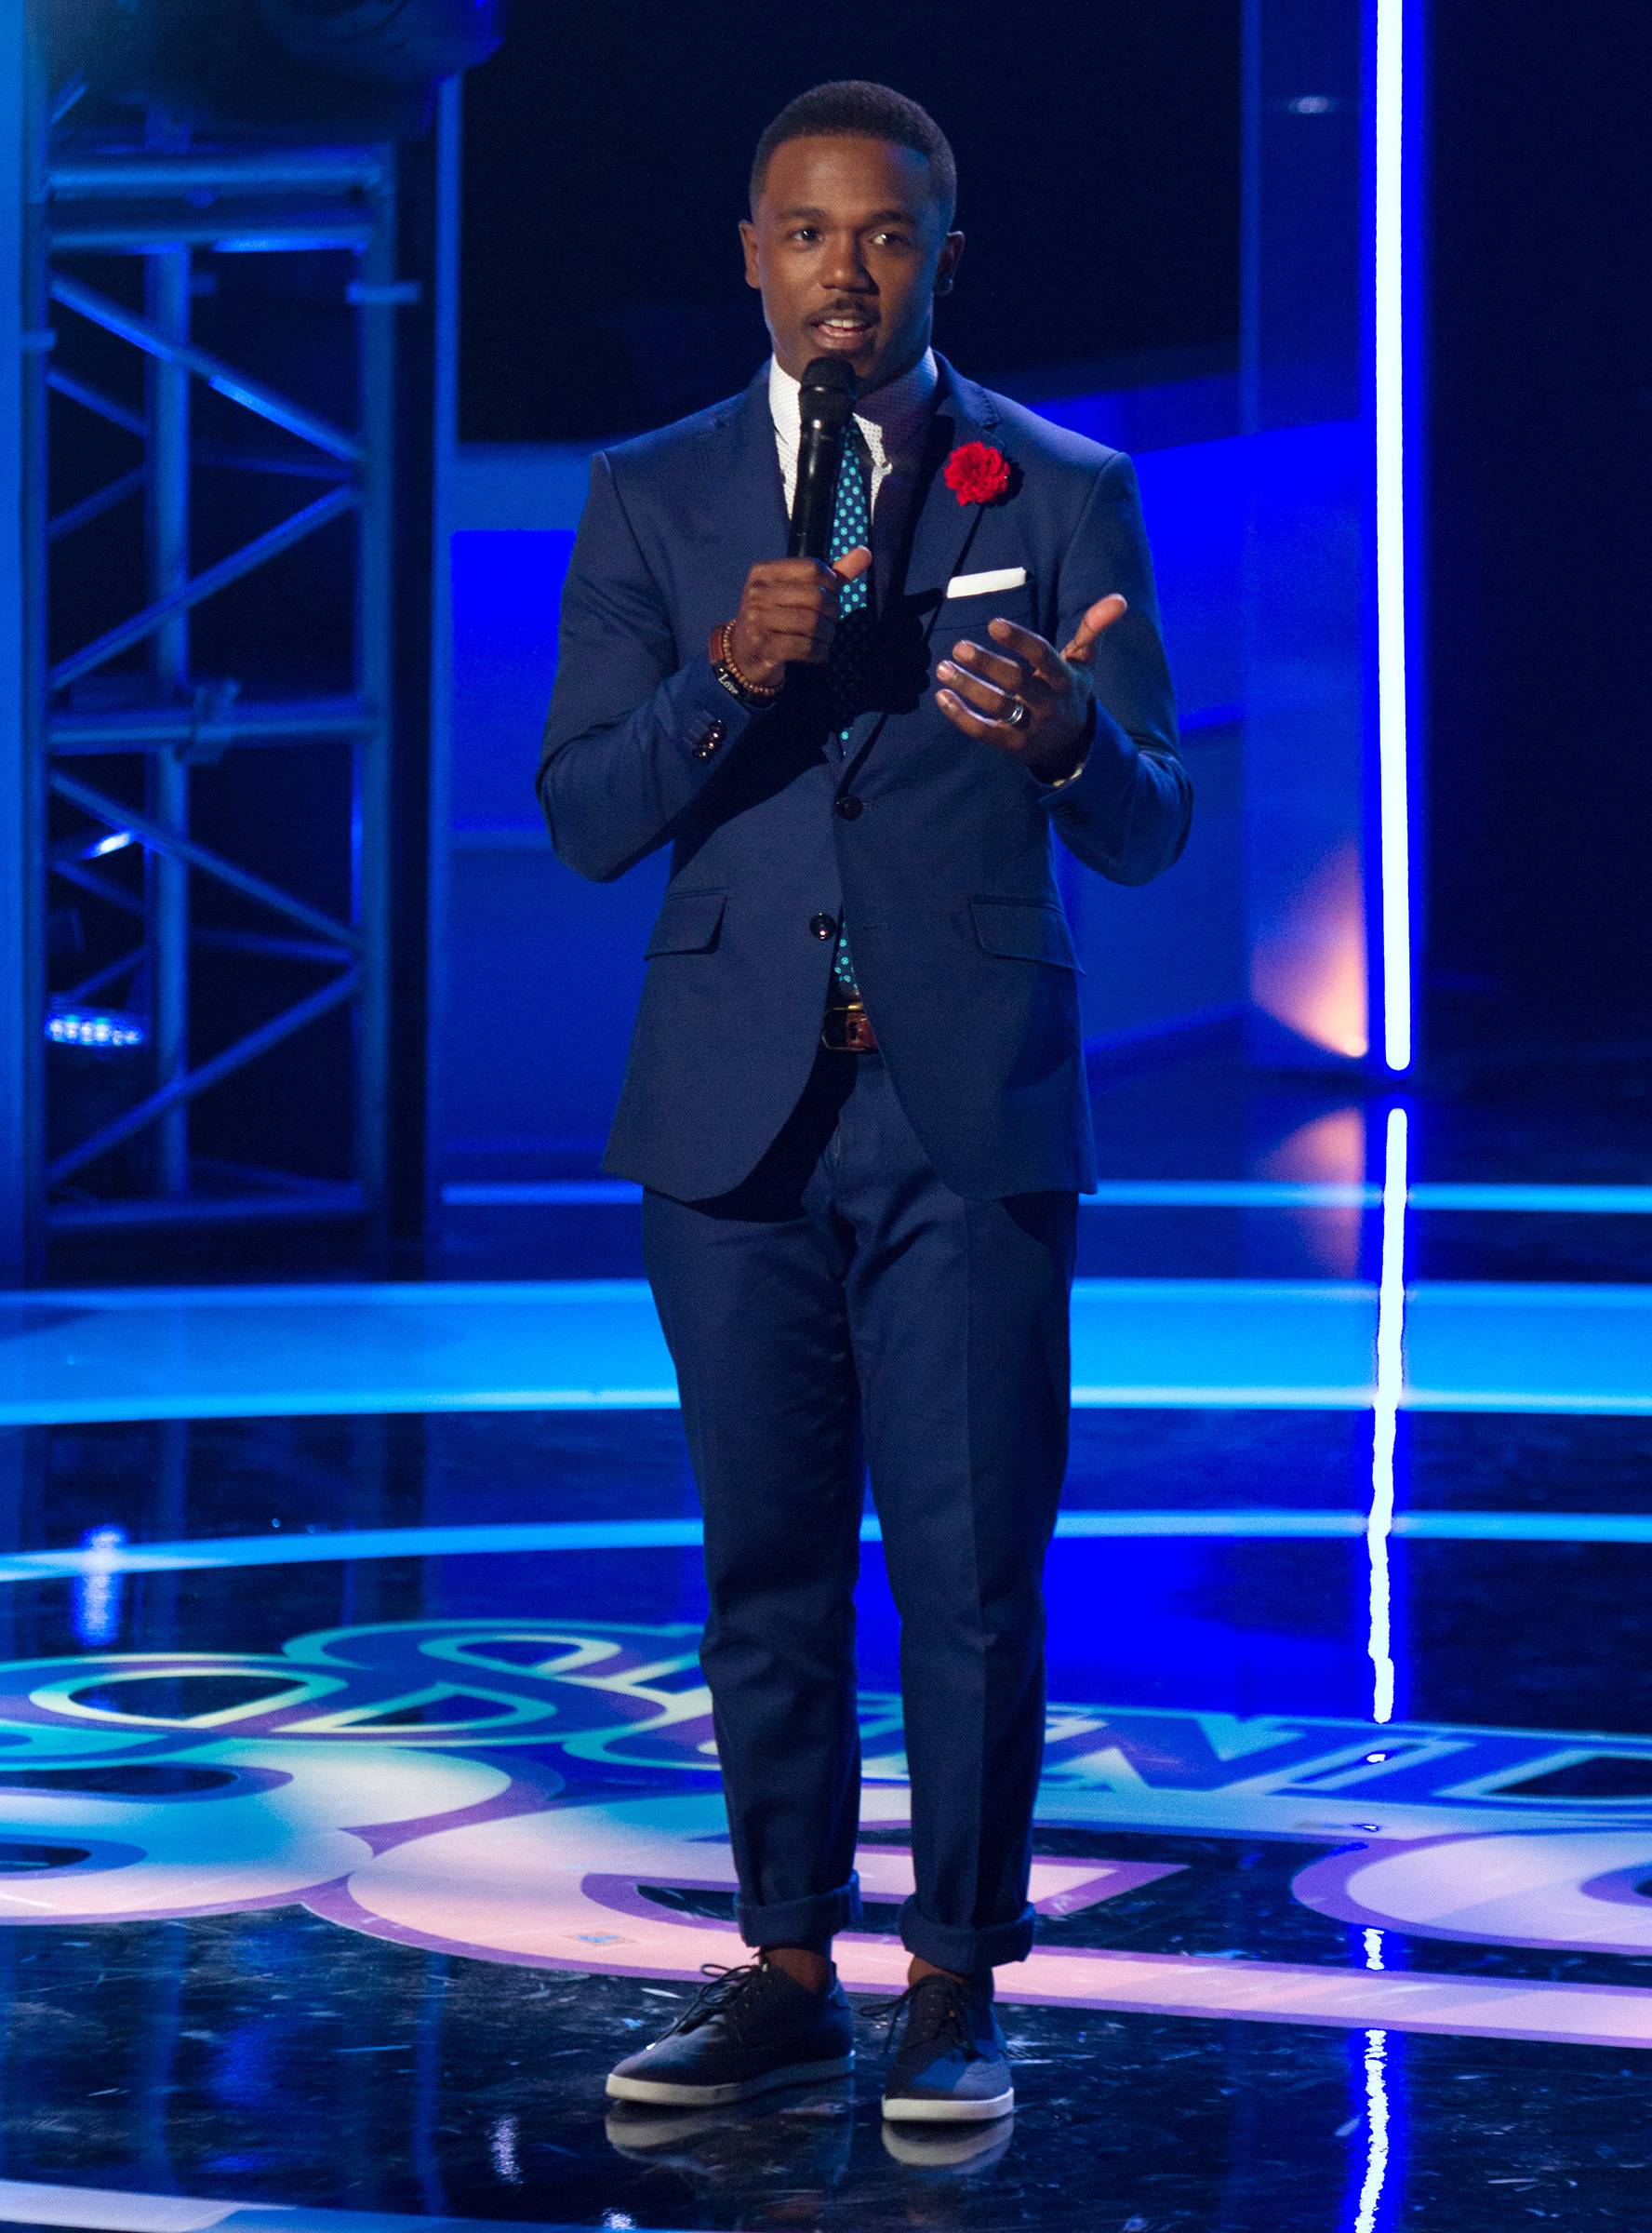 DATHAN THIGPEN IS THE SUNDAY BEST ALL STARS WINNER  - America voted and now Sunday Best has finally crowned the next Sunday Best All-Star. Dathan Thigpen not only earns the title of this season's Sunday Best All-Star, but he also is awarded with a national recording contract and a cash prize.&nbsp; (Photo: BET)